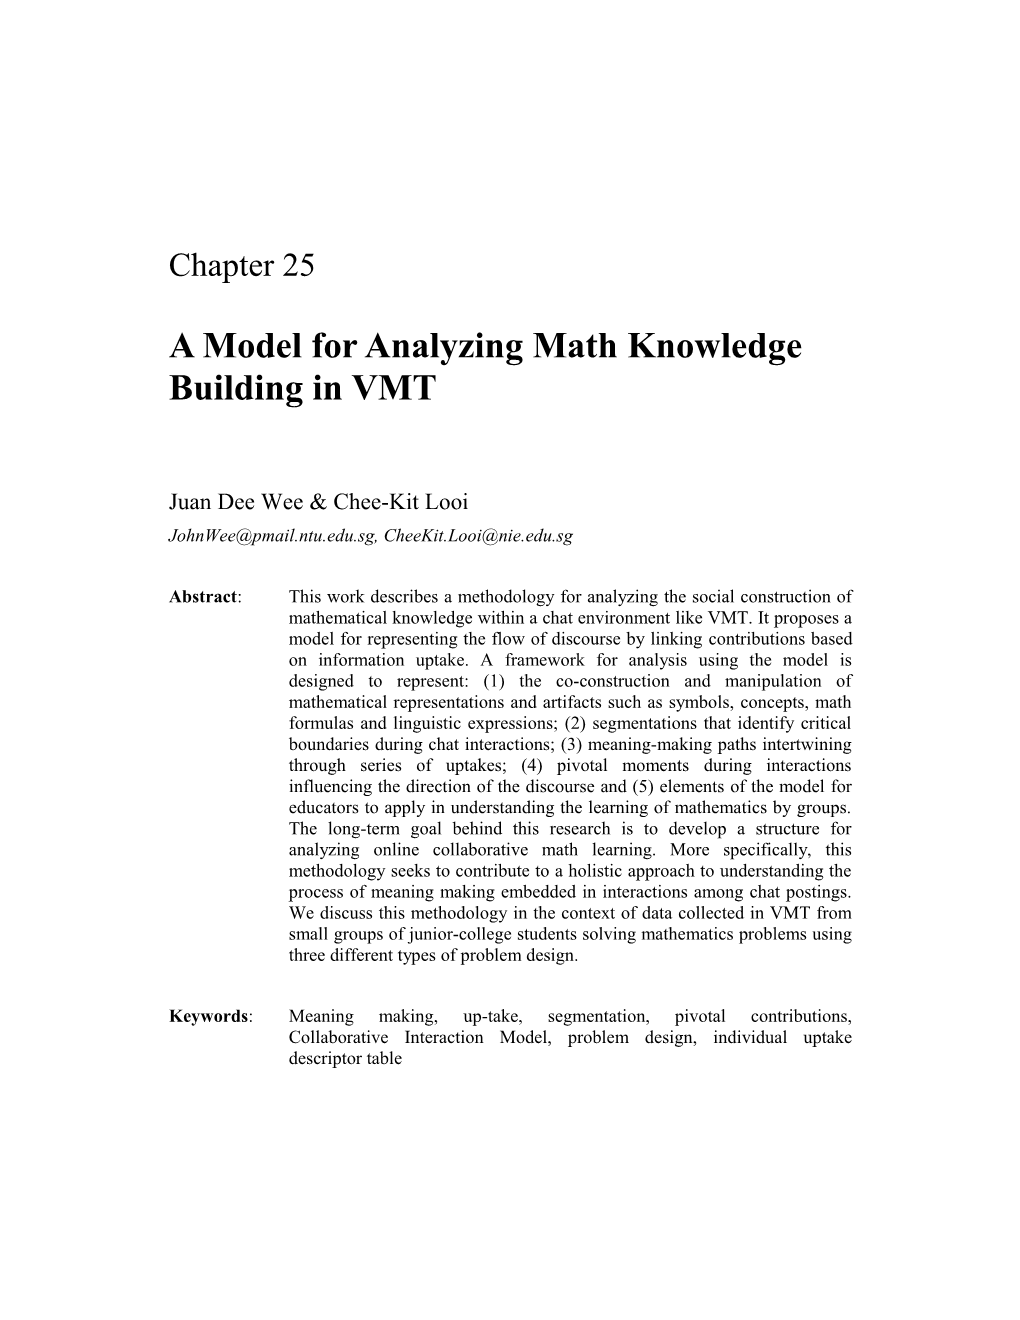 A Model for Analyzing Math Knowledge Building in VMT